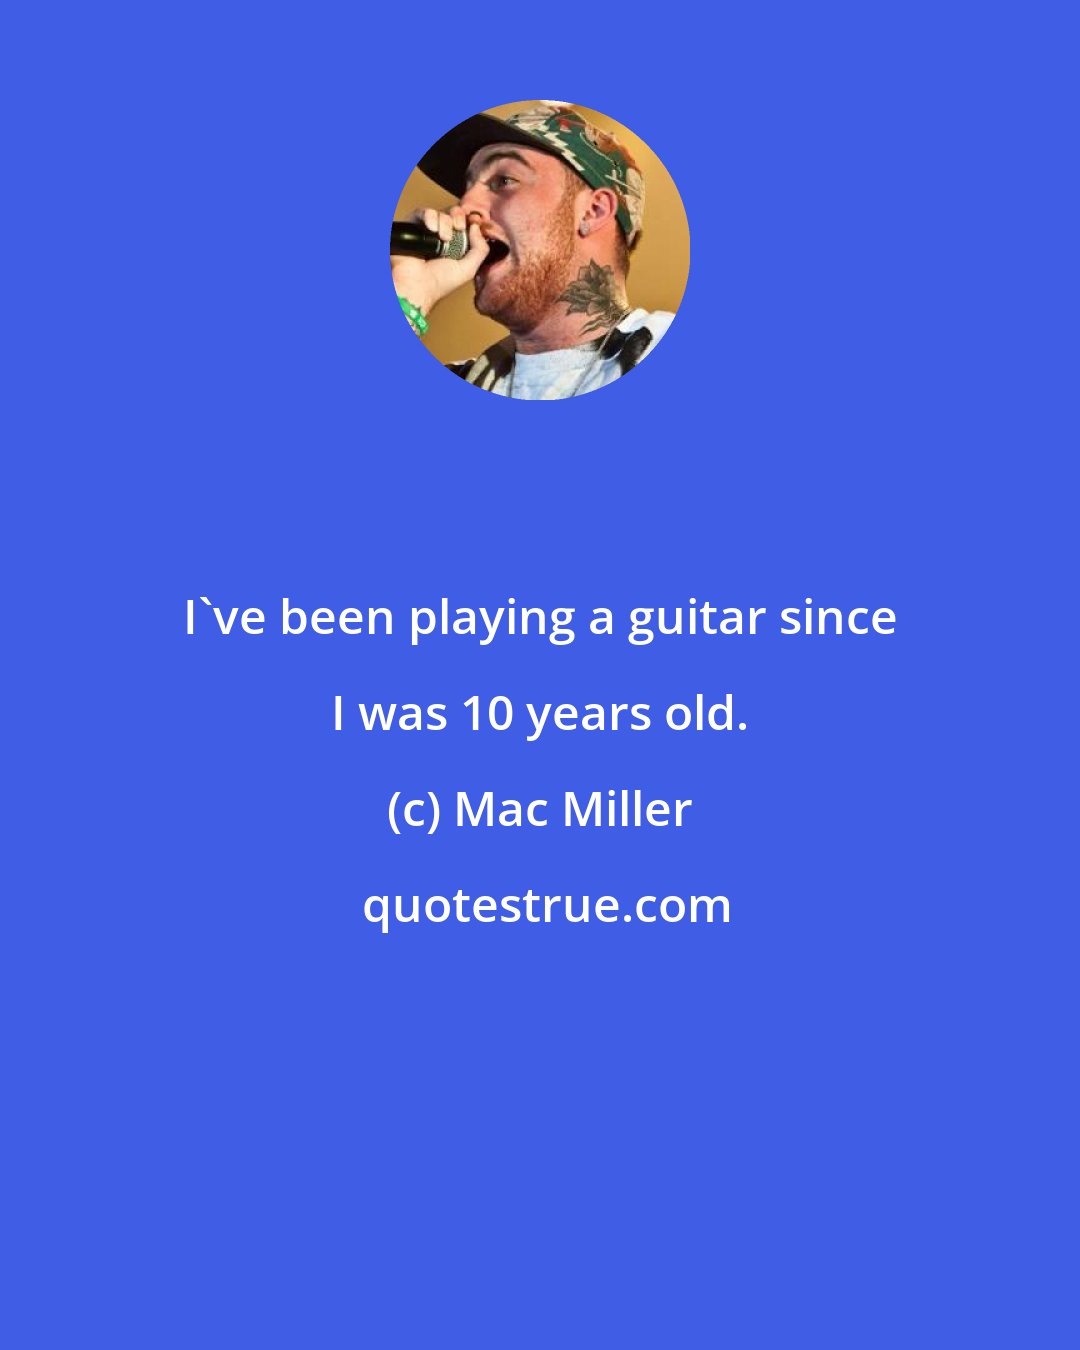 Mac Miller: I've been playing a guitar since I was 10 years old.